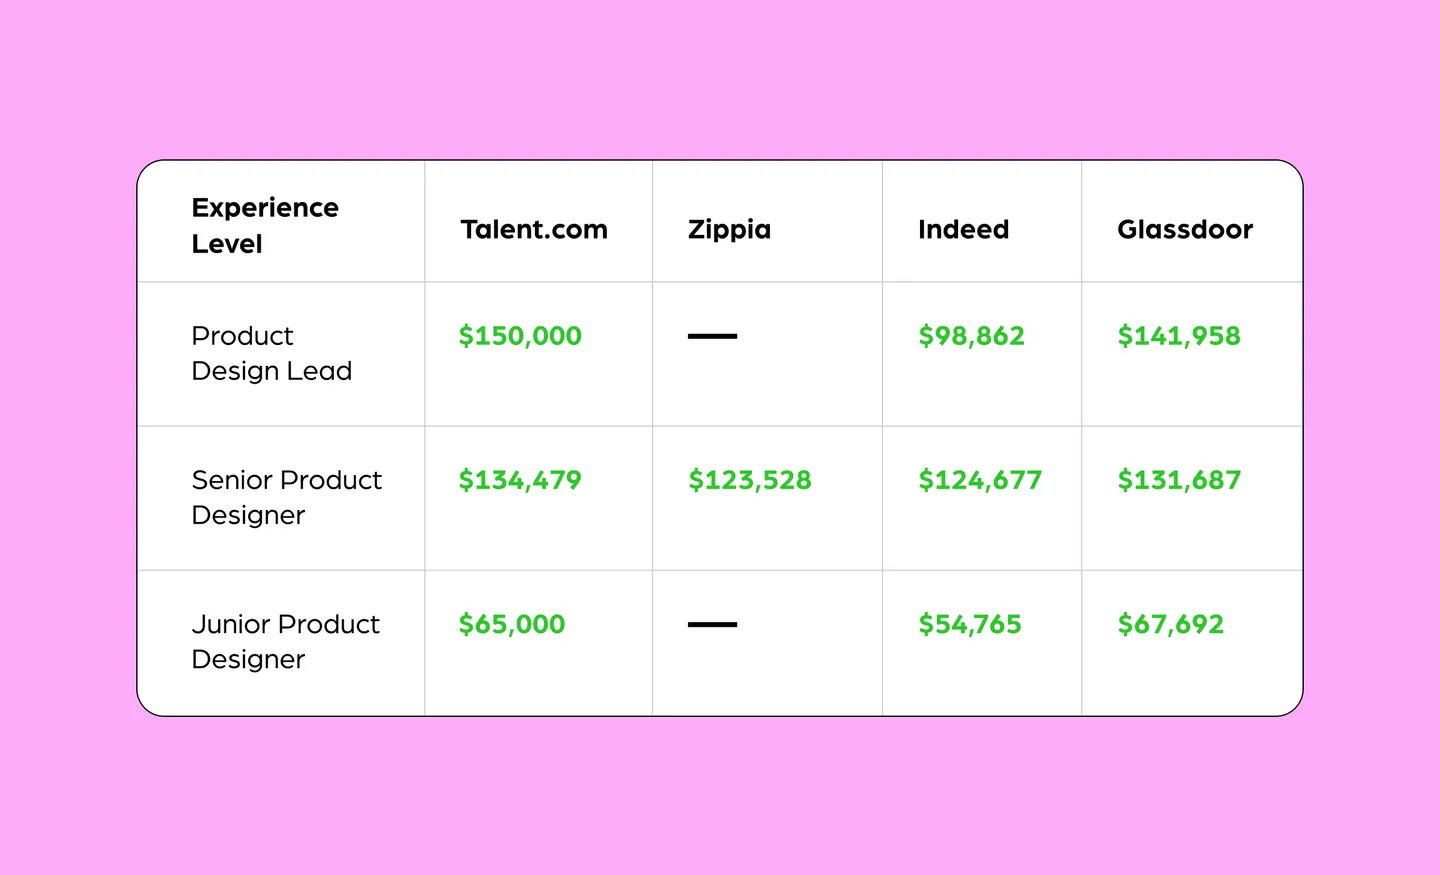 Product designer salaries by experience